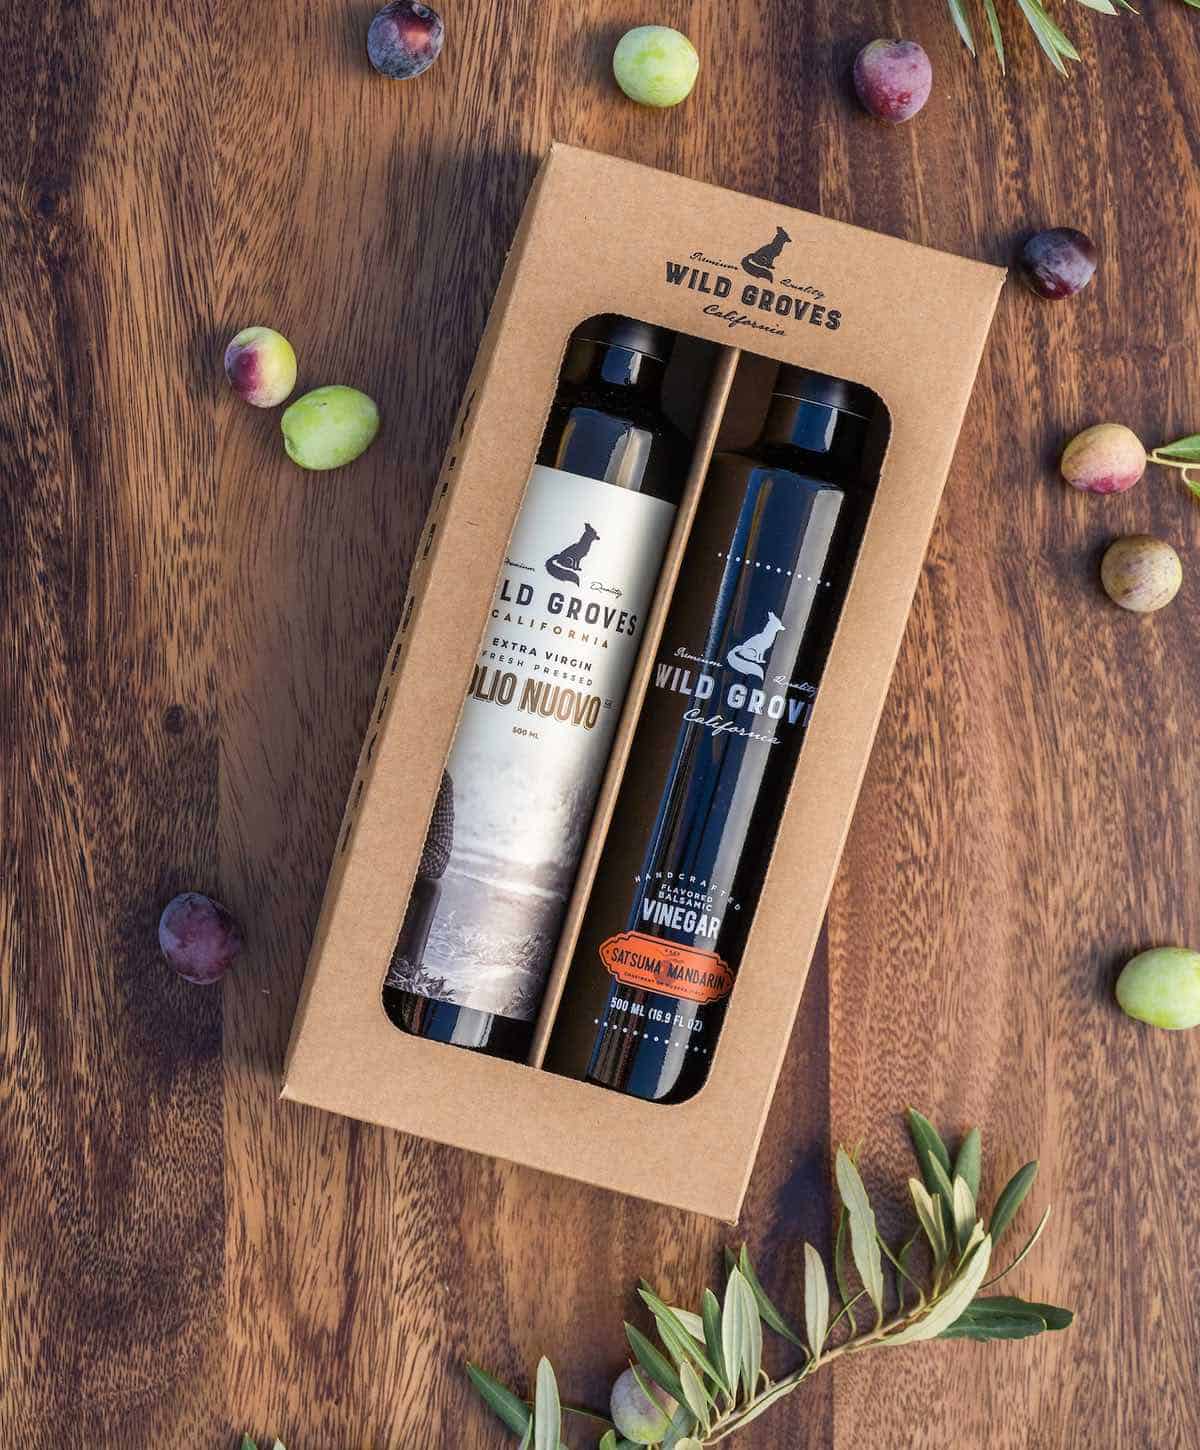 Beautifully wrapped olive oil and vinegar gift set from Wild Groves. 